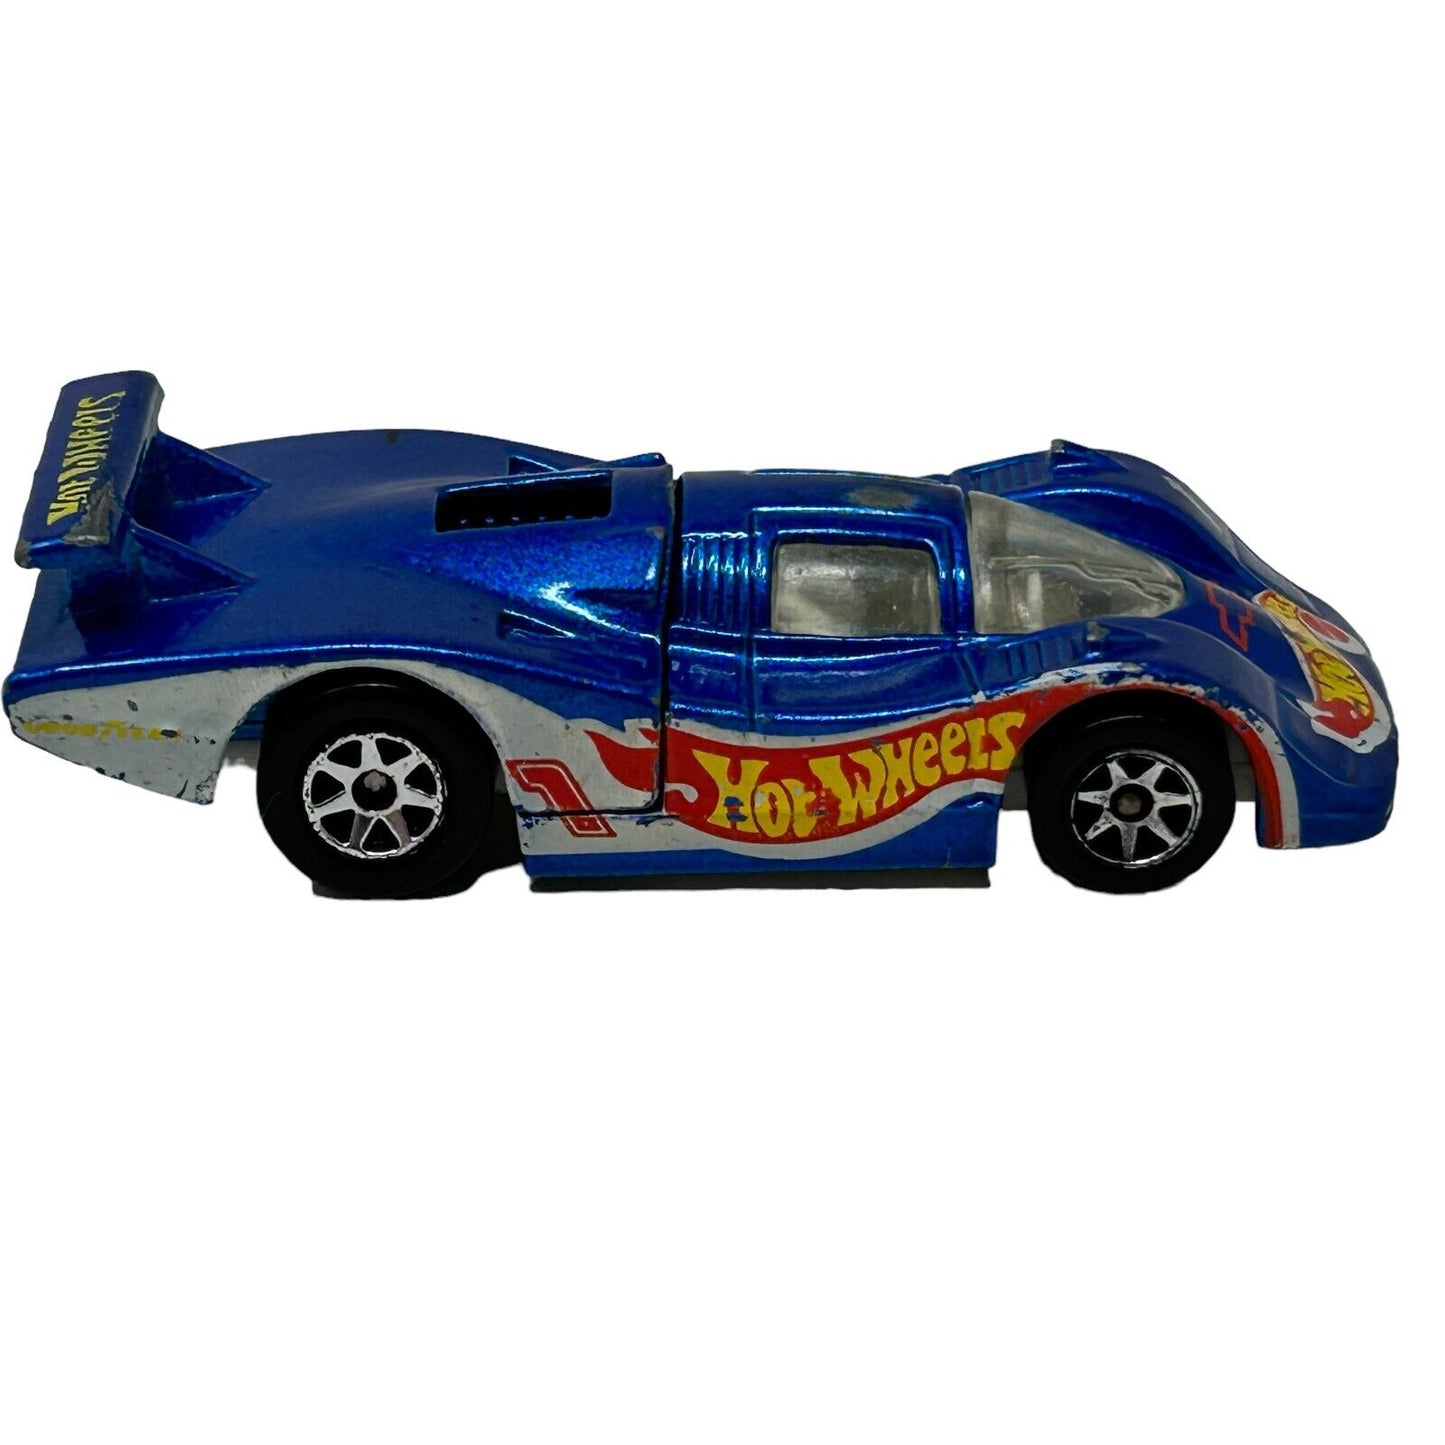 Sol-aire CX4 Hot Wheels Racing 1983 Collectible Diecast Car Blue Toy Vehicle 90s